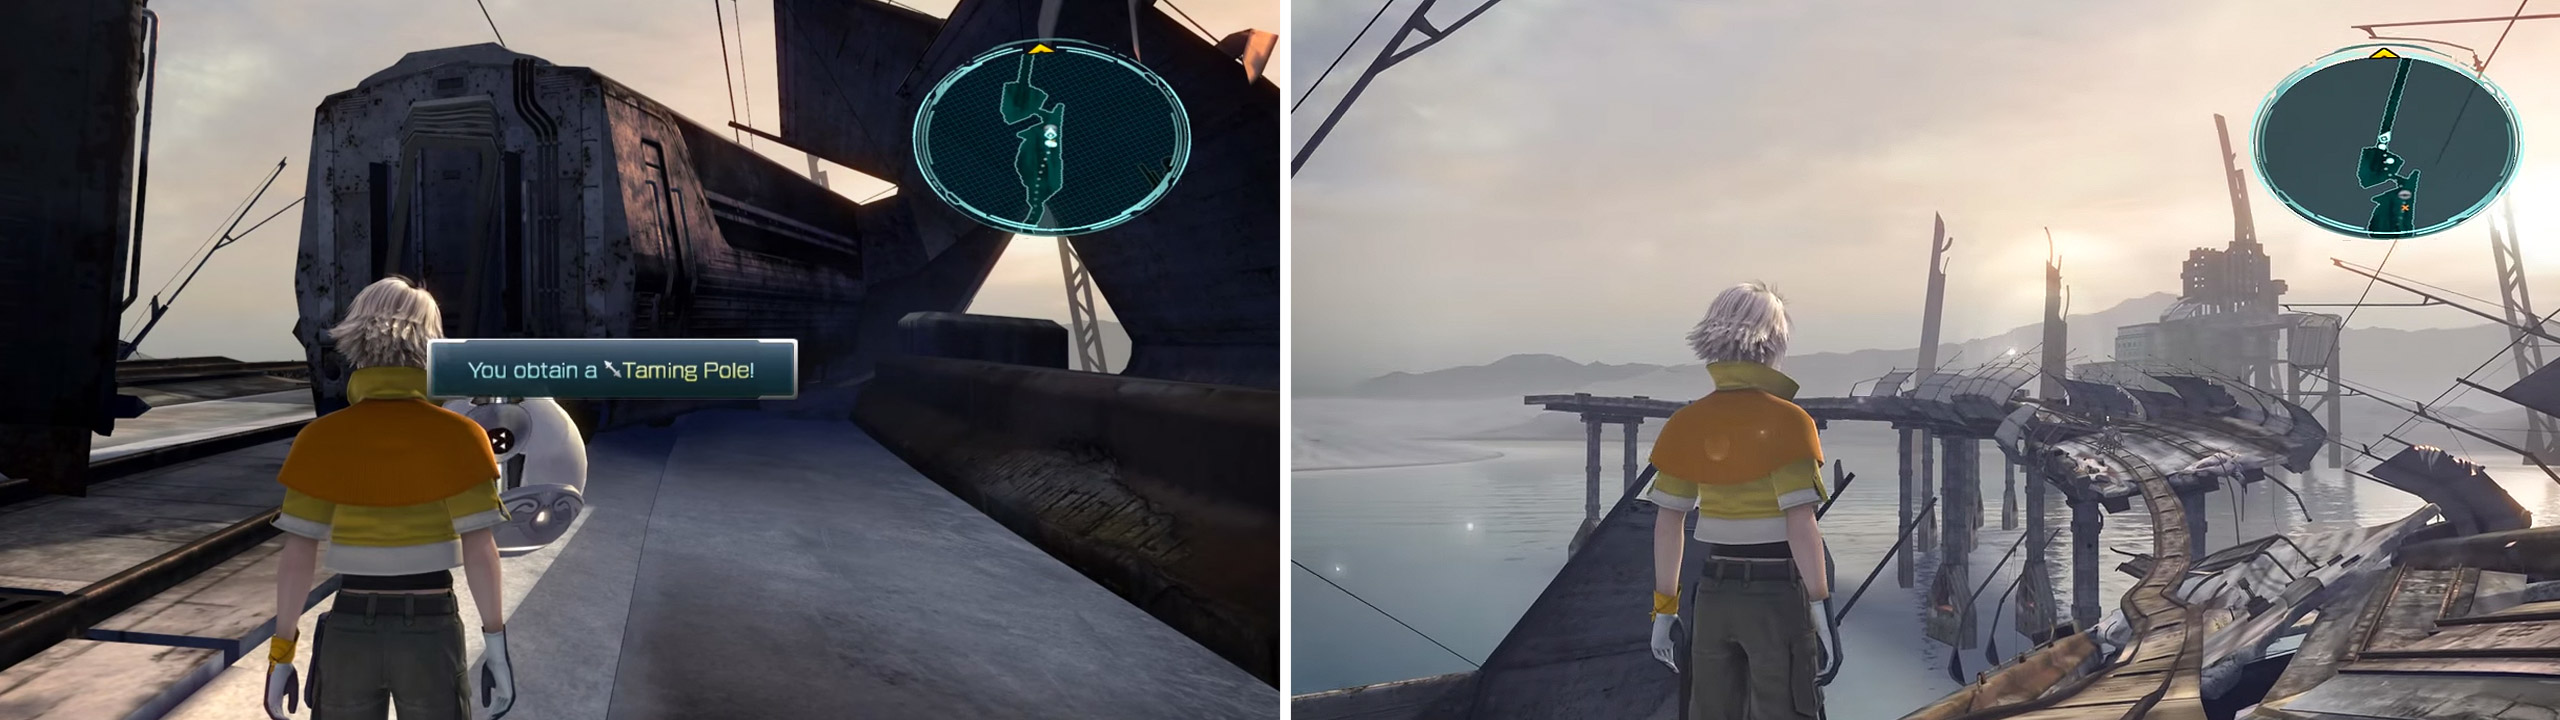 Taming Pole location (left) and the scenery around the Rust-eaten Bridge (right).